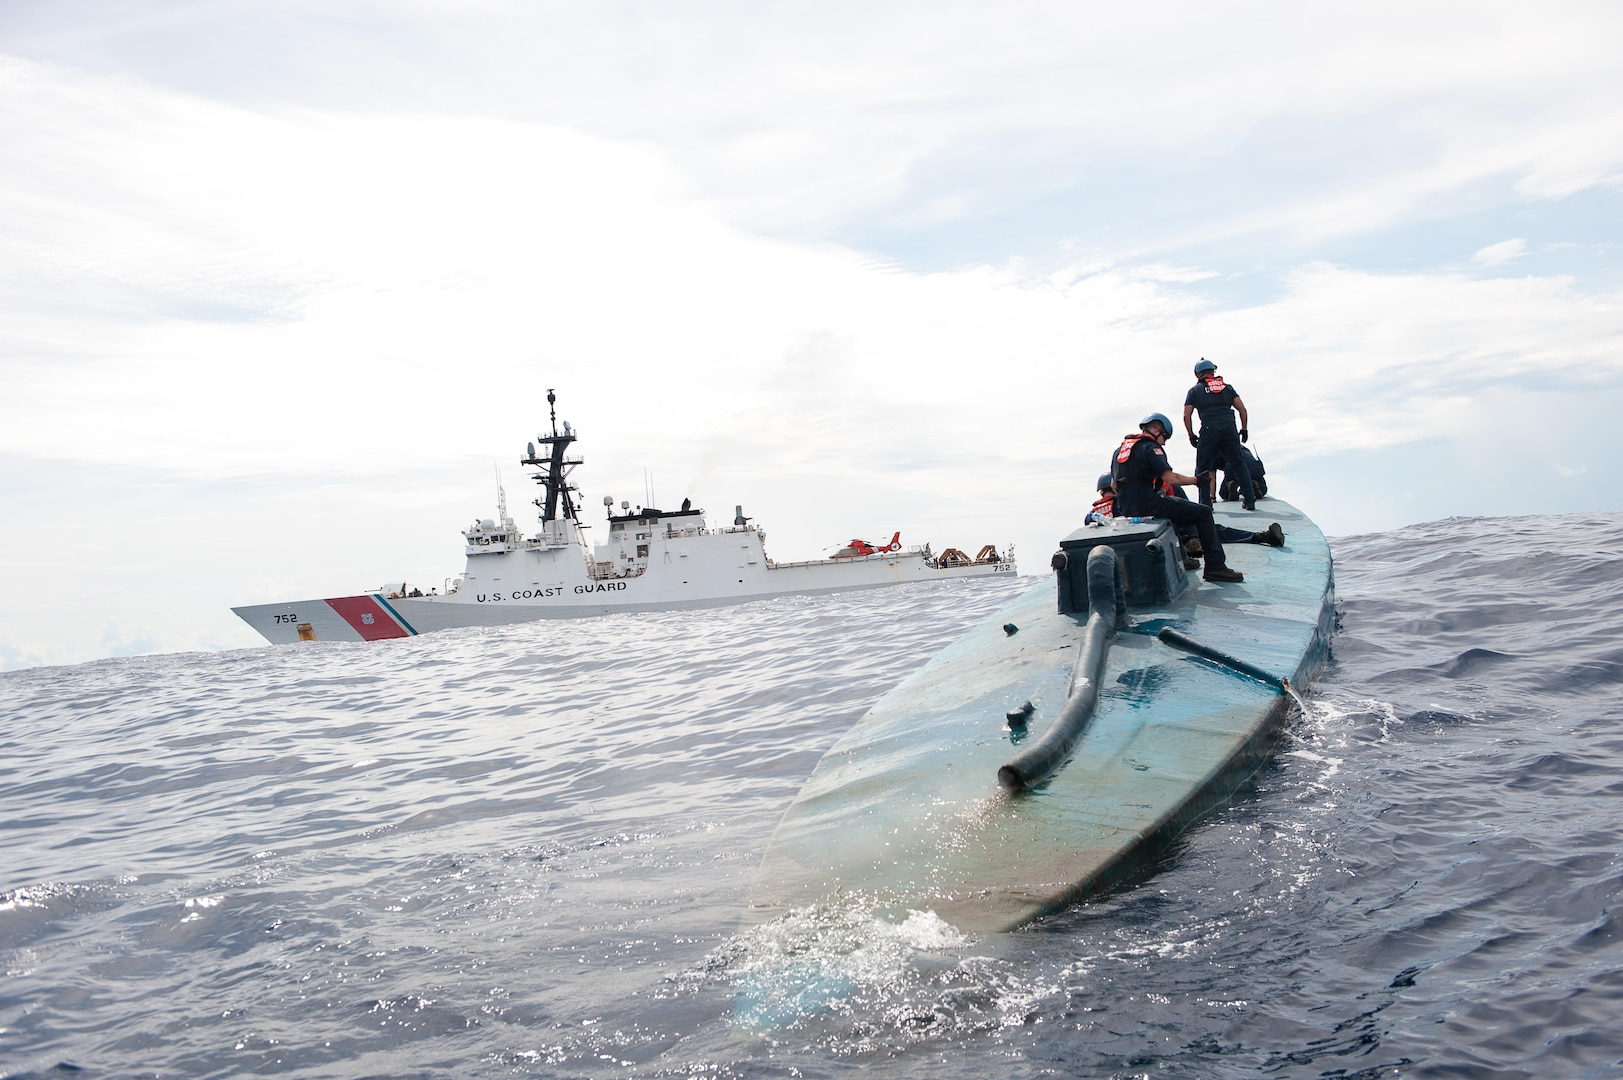 A Coast Guard Cutter Stratton boarding team investigates a self-propelled semi-submersible interdicted in international waters off the coast of Central America, July 19, 2015. The Stratton’s crew recovered more than 6 tons of cocaine from the 40-foot vessel. Coast Guard photo by Petty Officer 2nd Class LaNola Stone